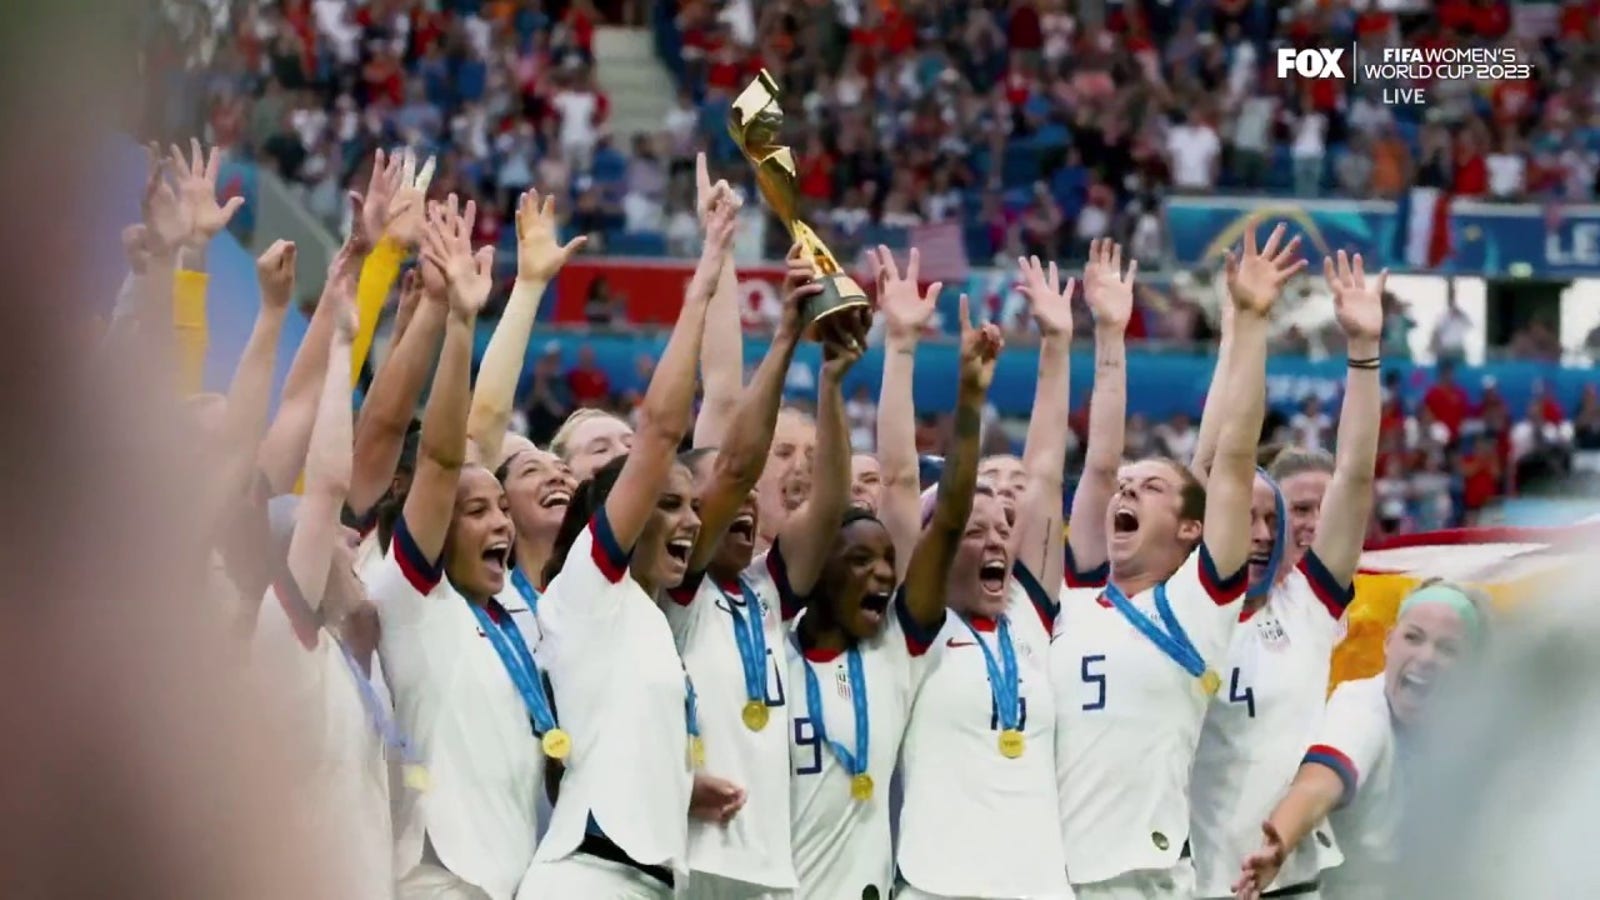 Tom Rinaldi on what makes this FIFA Women's World Cup special